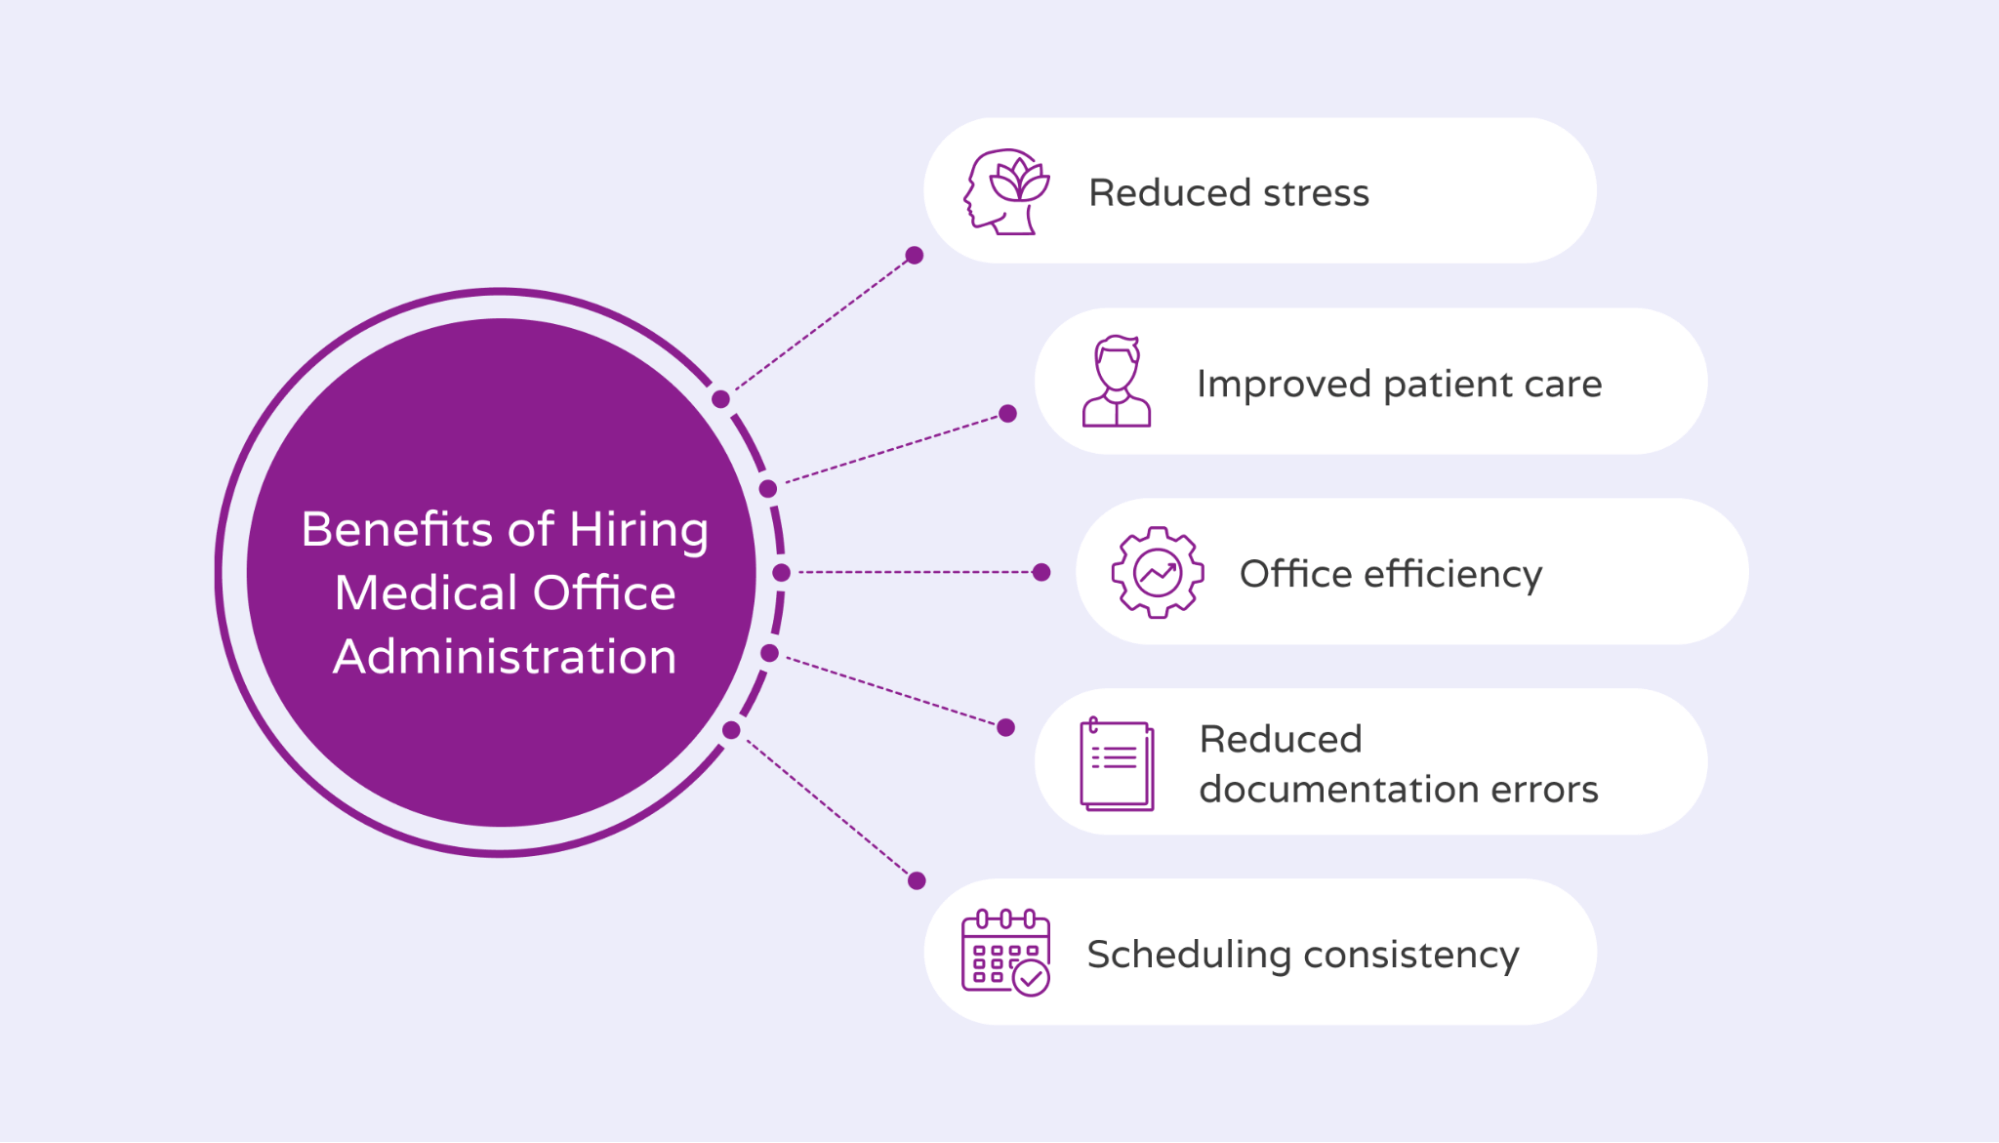 Five benefits of hiring a medical office administration team.